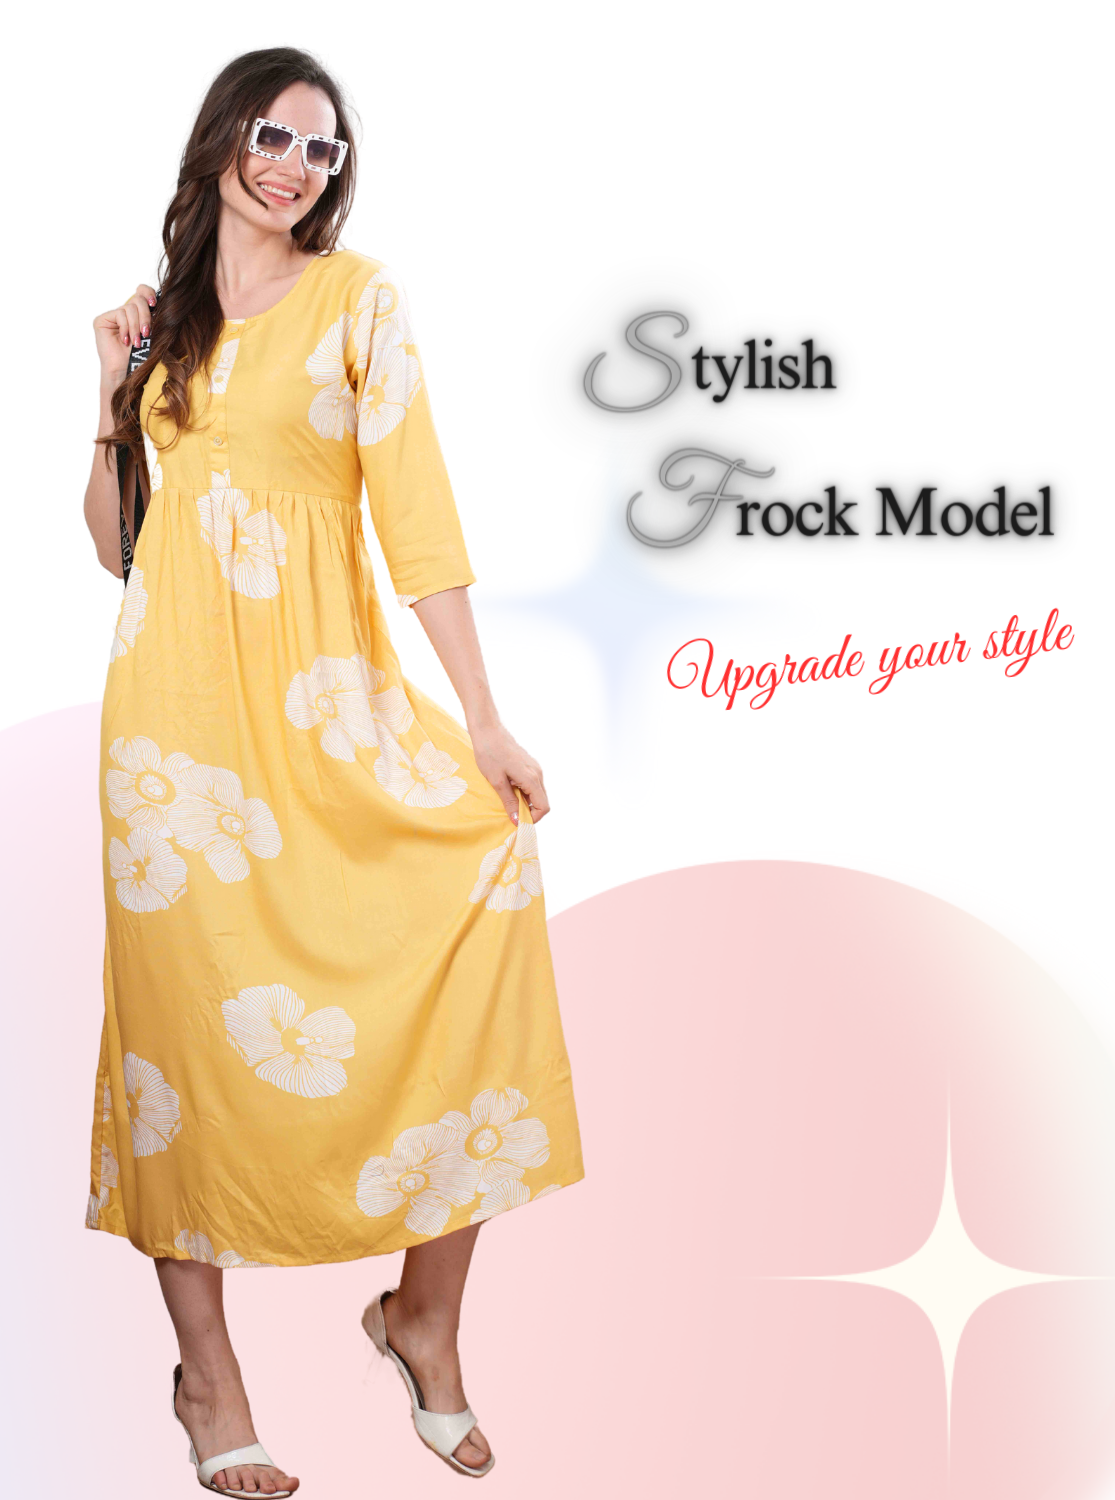 New Arrivals ONLY MINE Premium Rayon FROCK Model Pleated Nighties - Style 3/4 Length Sleeve | Soft & Smooth Cloths | Stylish Look | Perfect Nightdress for Trendy Women's